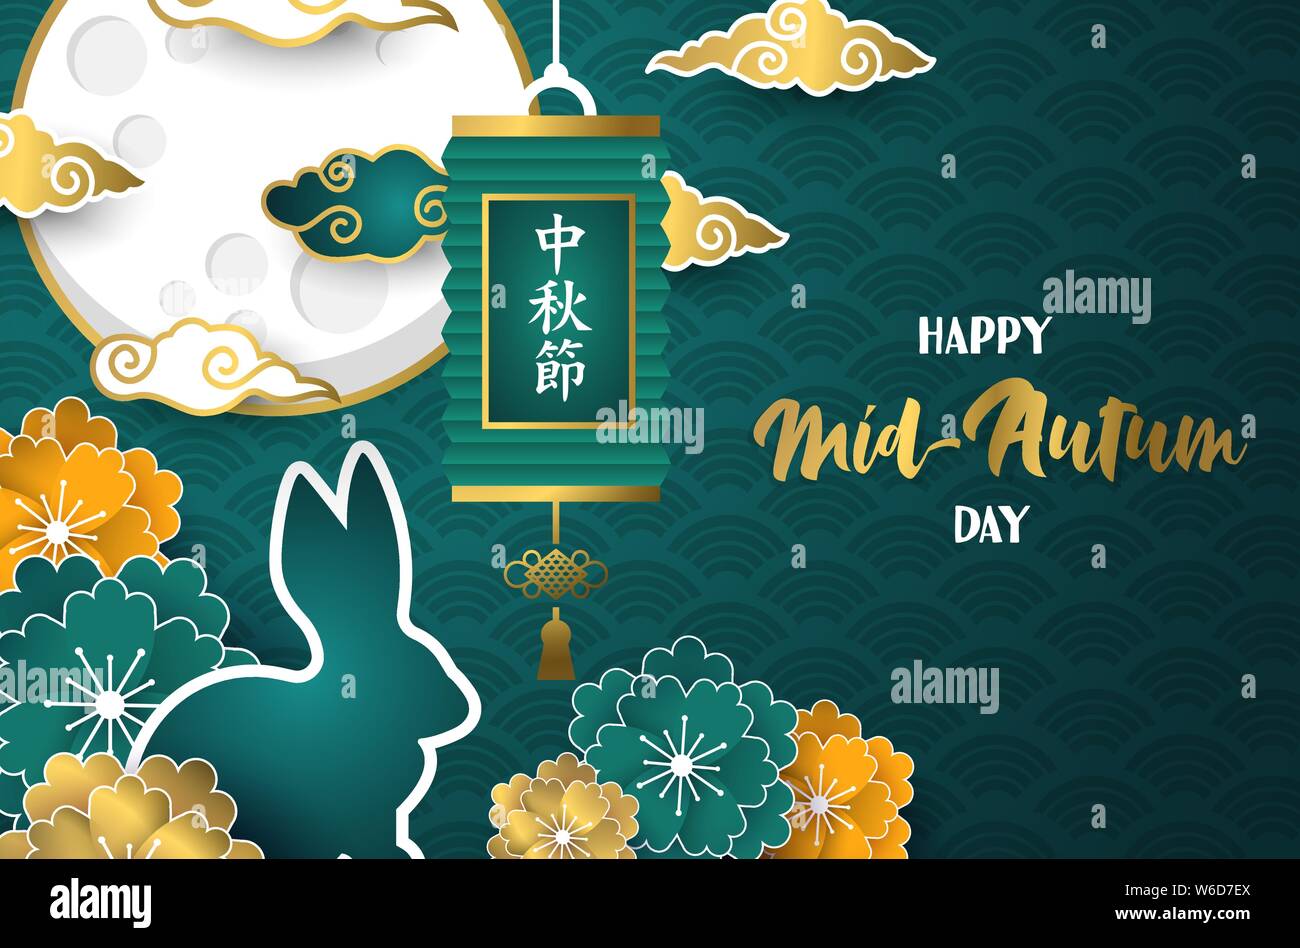 Happy Mid Autumn Festival In Chinese